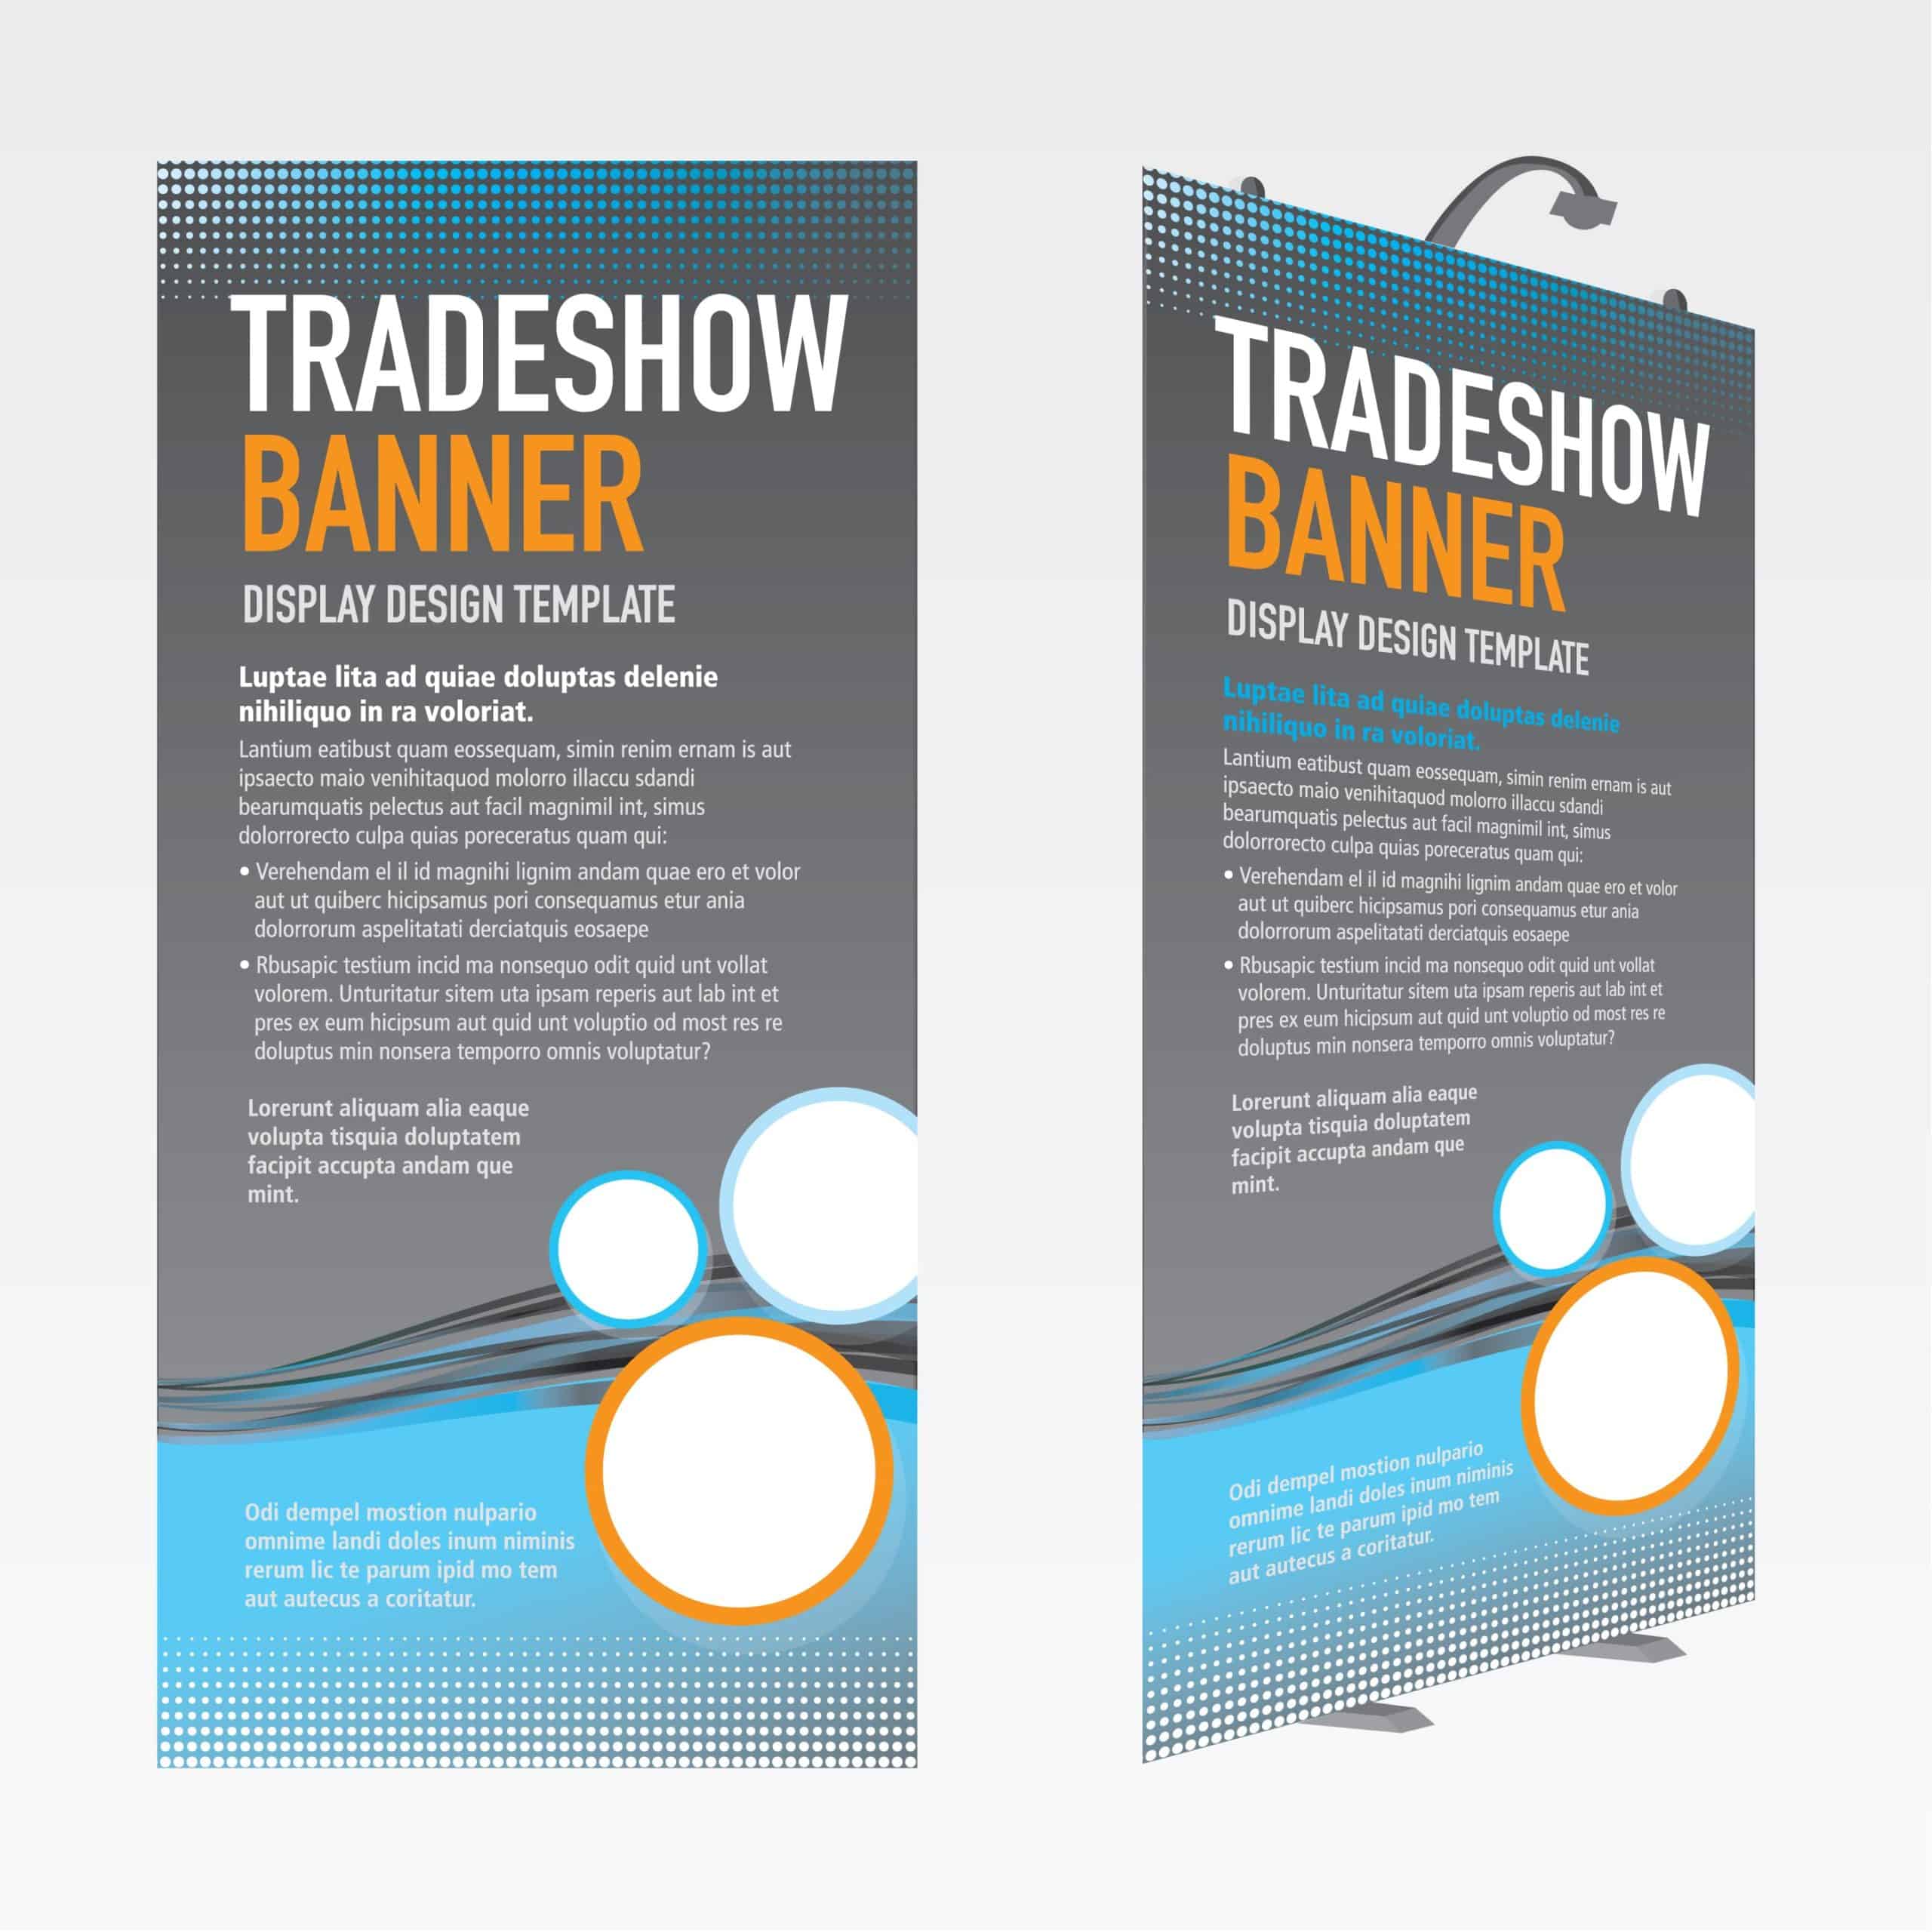 Printing for Tradeshow and Convention Exhibitors in New York City - Blog Post